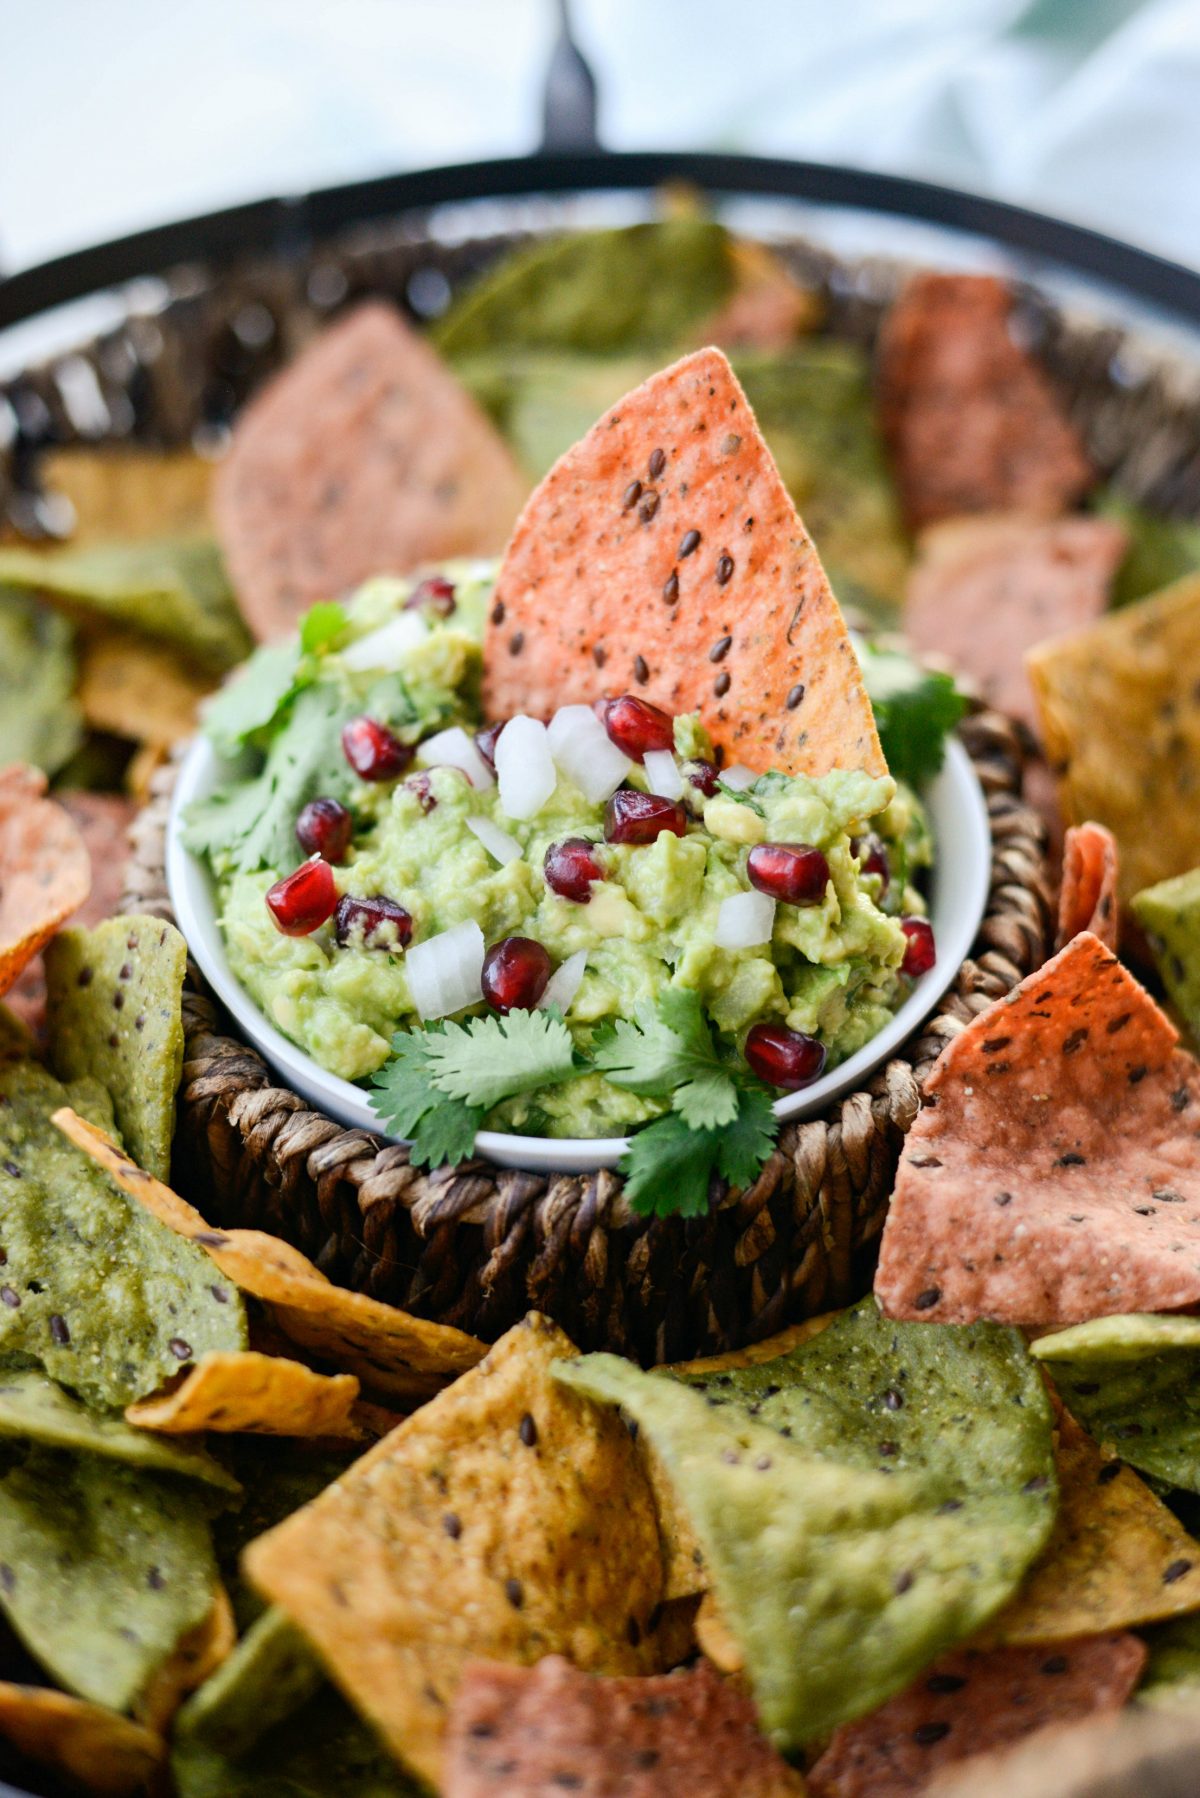 Holiday Guacamole served with tri-color tortilla chips